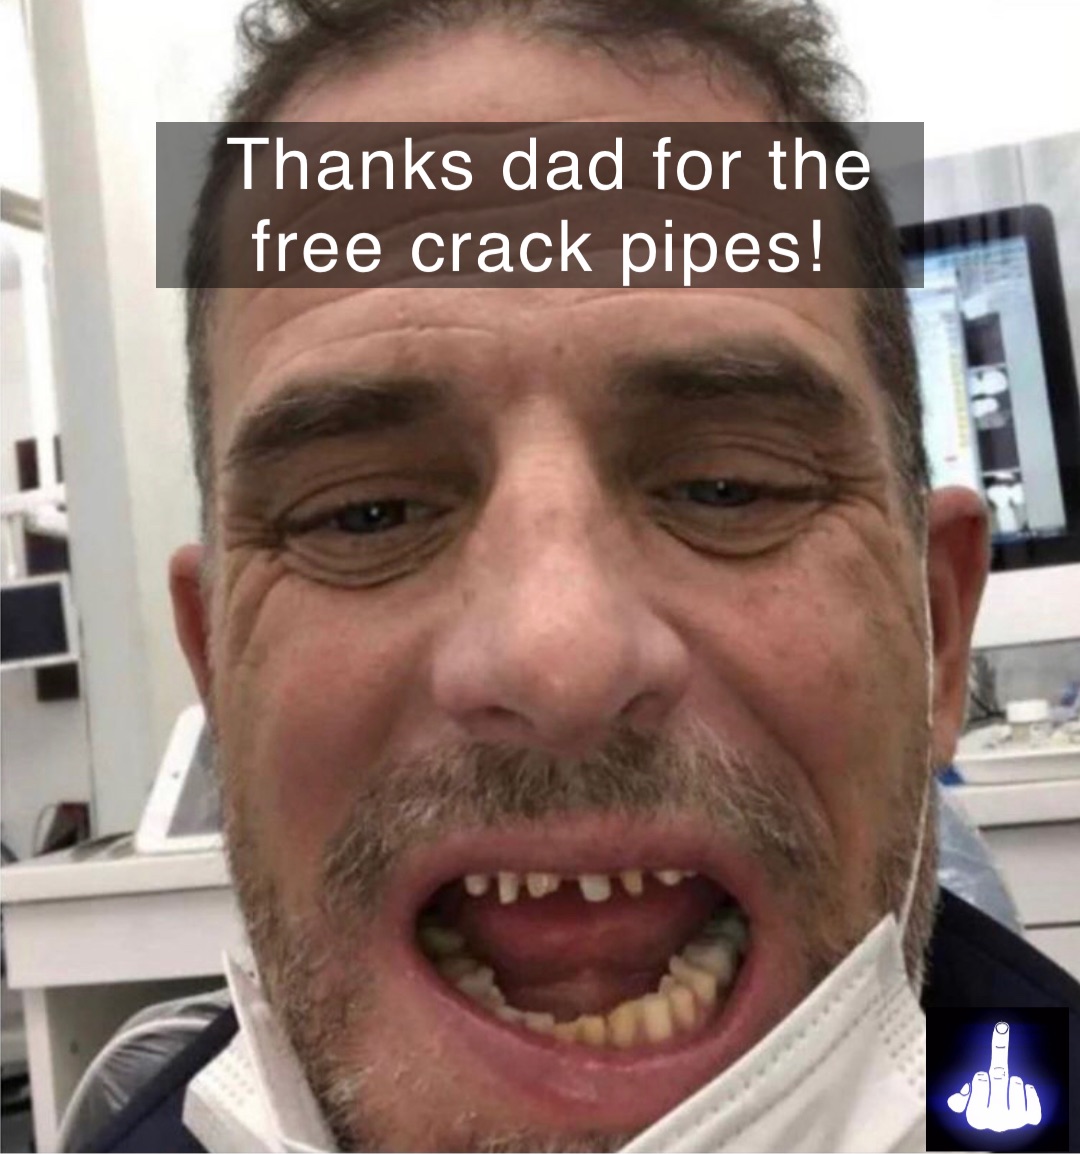 Thanks dad for the free crack pipes!